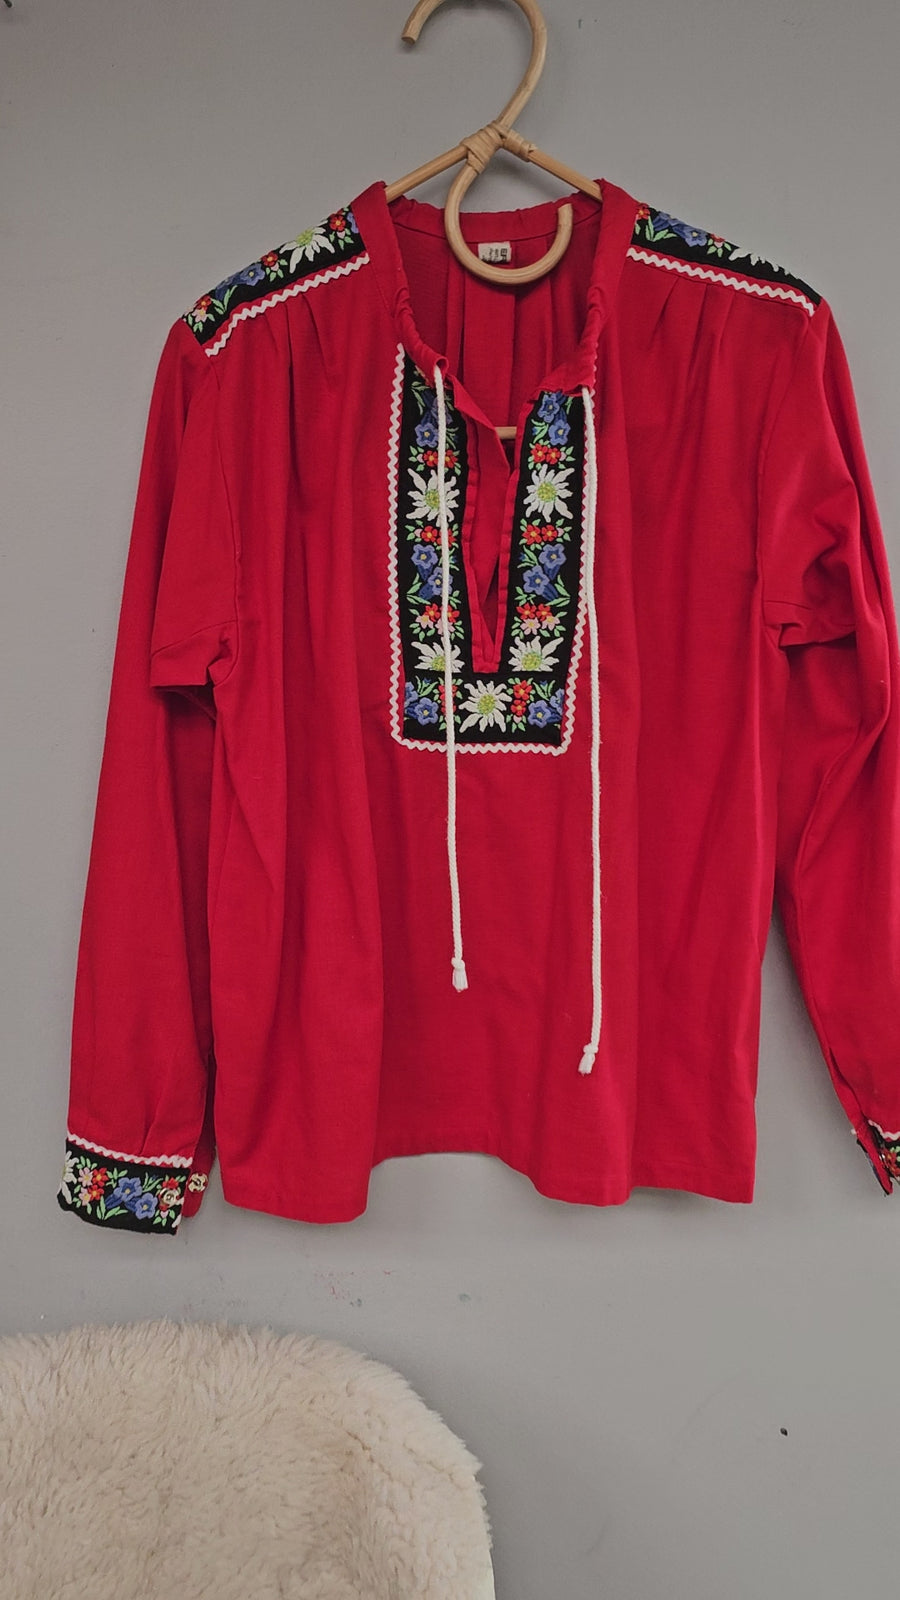 "Swiss Elegance: Red Embroidered Folk Gypsy Blouse" S/M